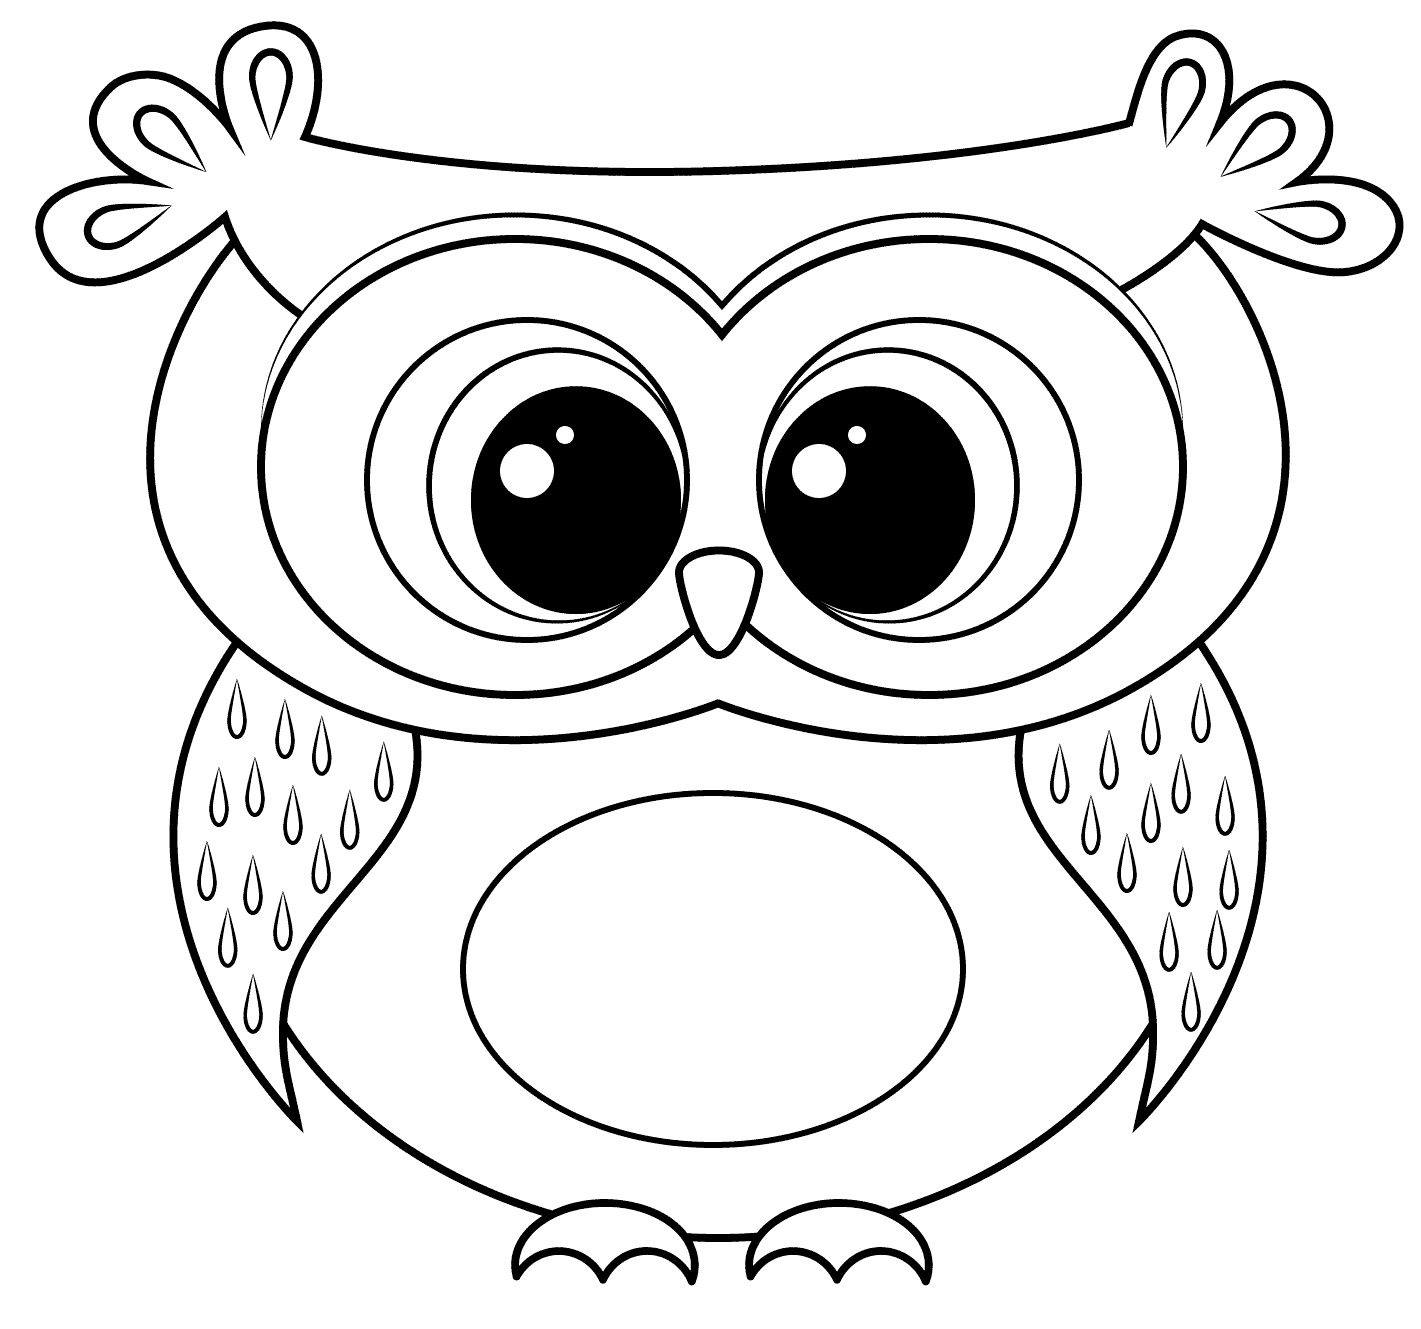 Cute Cartoon Owl Coloring Pages